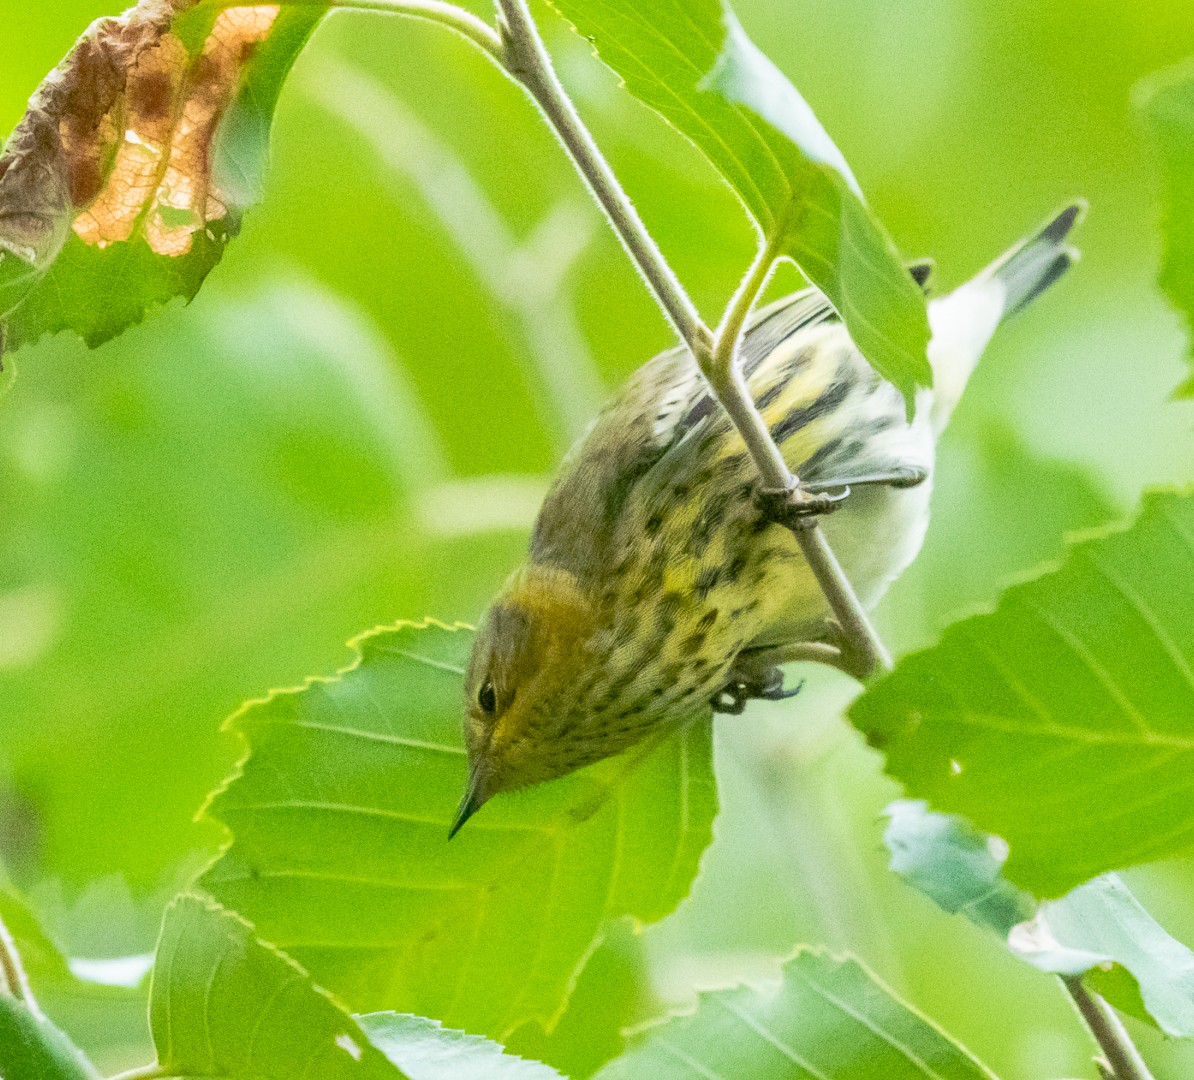 Cape May Warbler - Marianne Taylor